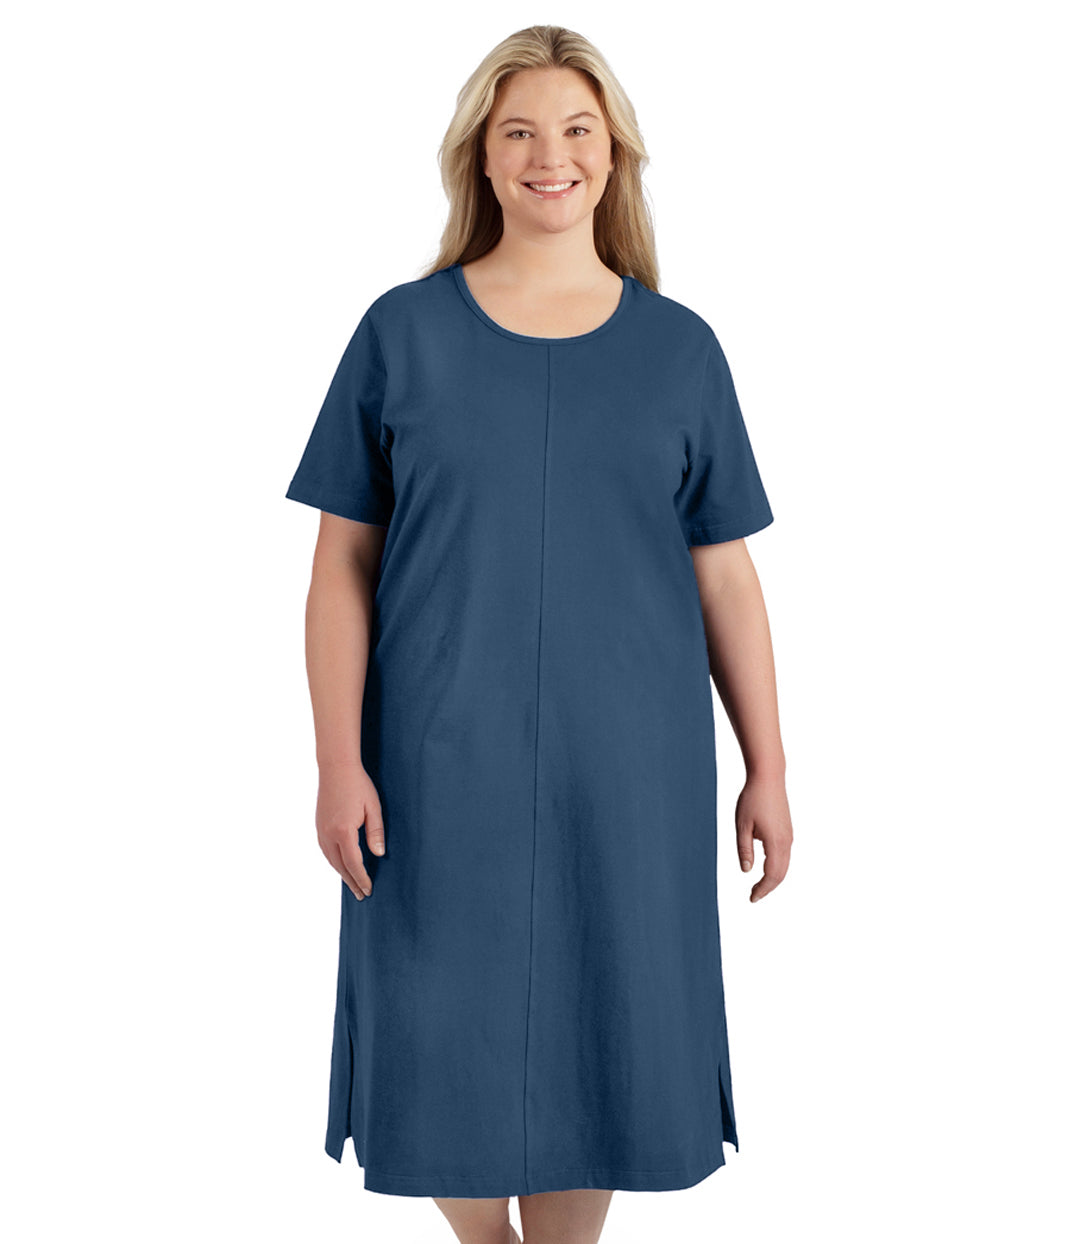 Plus size woman, facing to the front, wearing JunoActive plus size Stretch Naturals Short Sleeve Dress in the color denim blue.